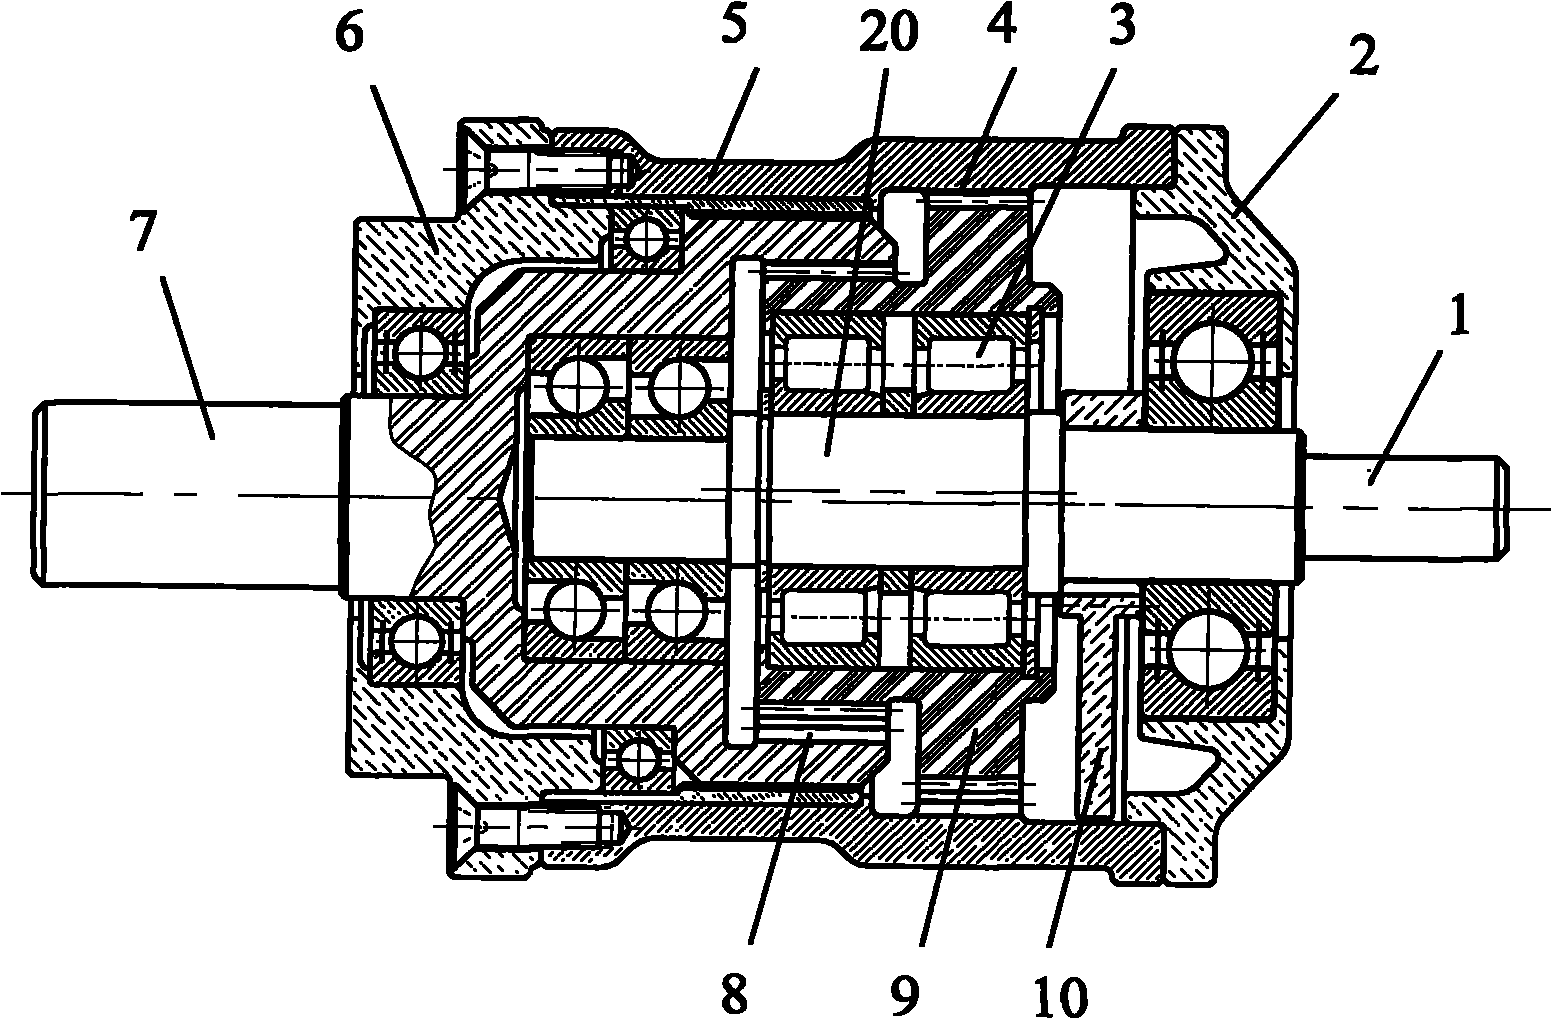 Reducer capable of regulating return difference